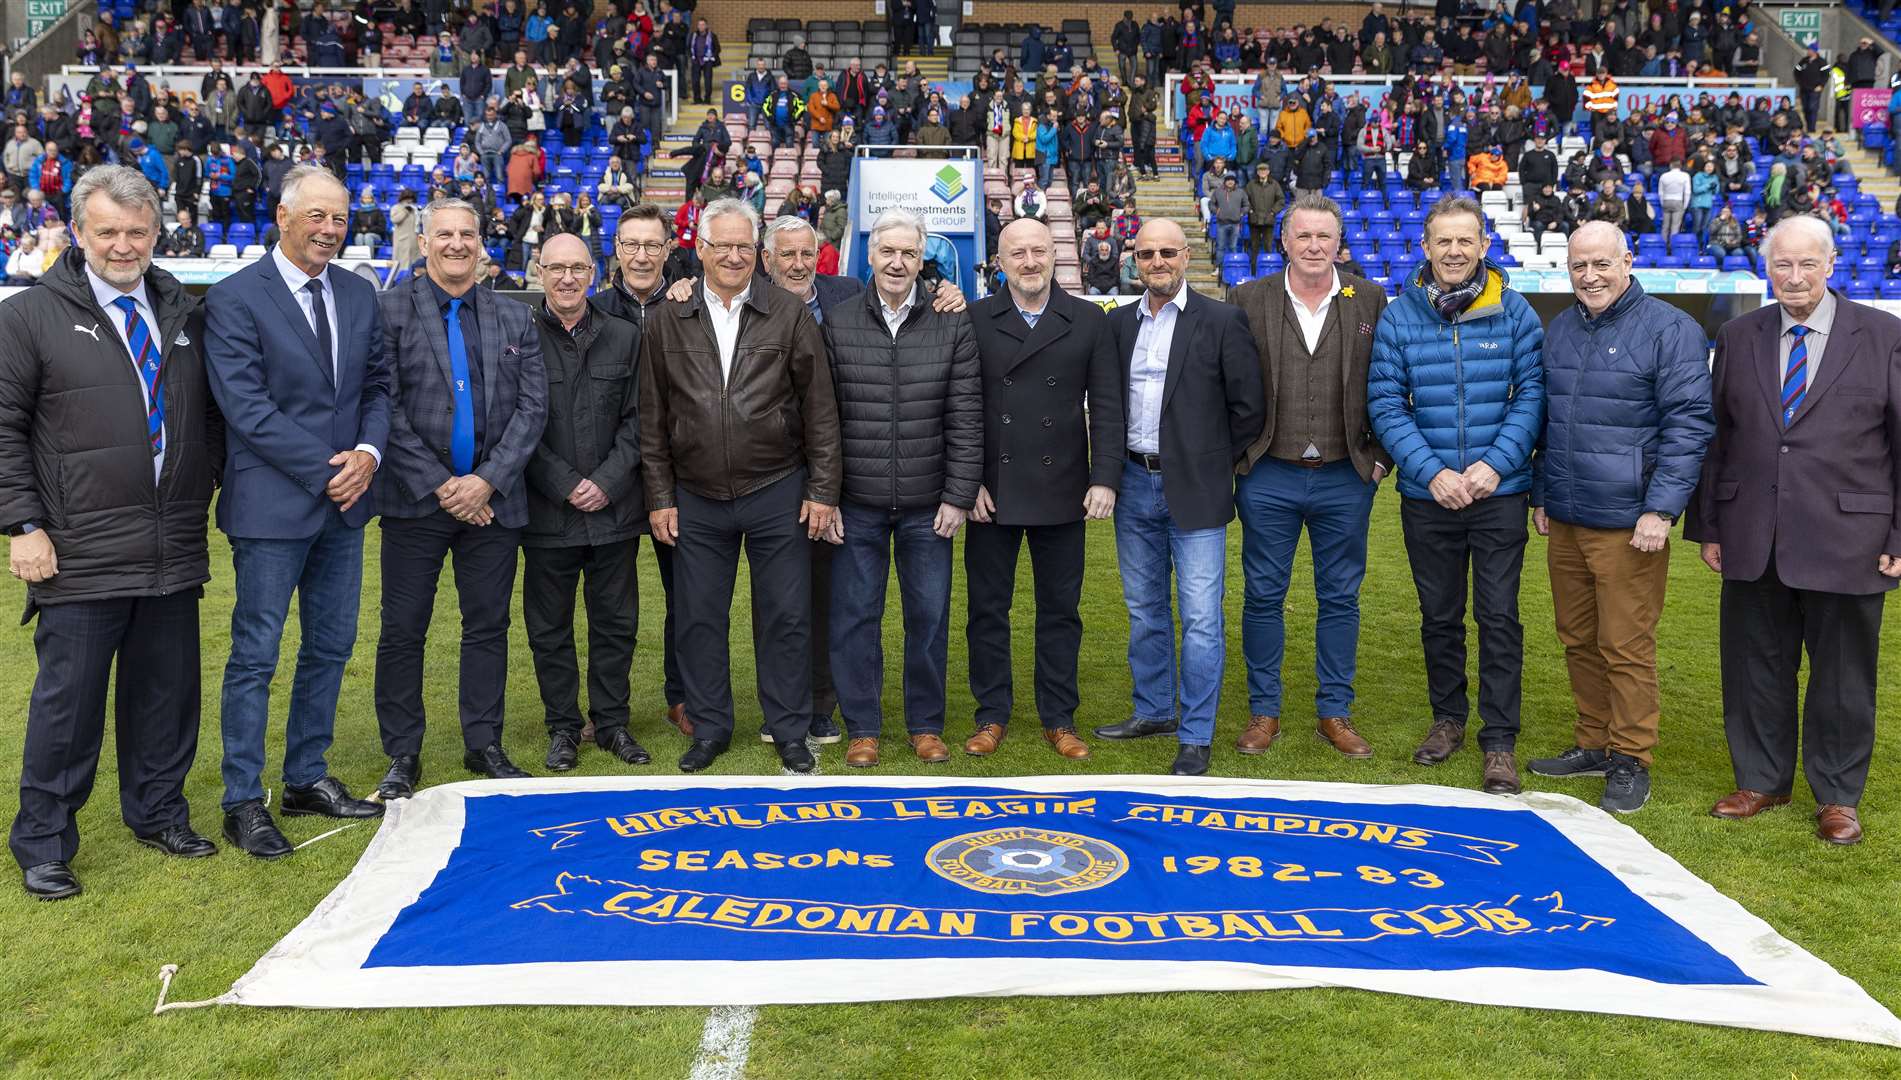 The invincible Caledonian FC squad reunited at ICT's match against Dundee to mark their 40th anniversary. Picture: Ken Macpherson